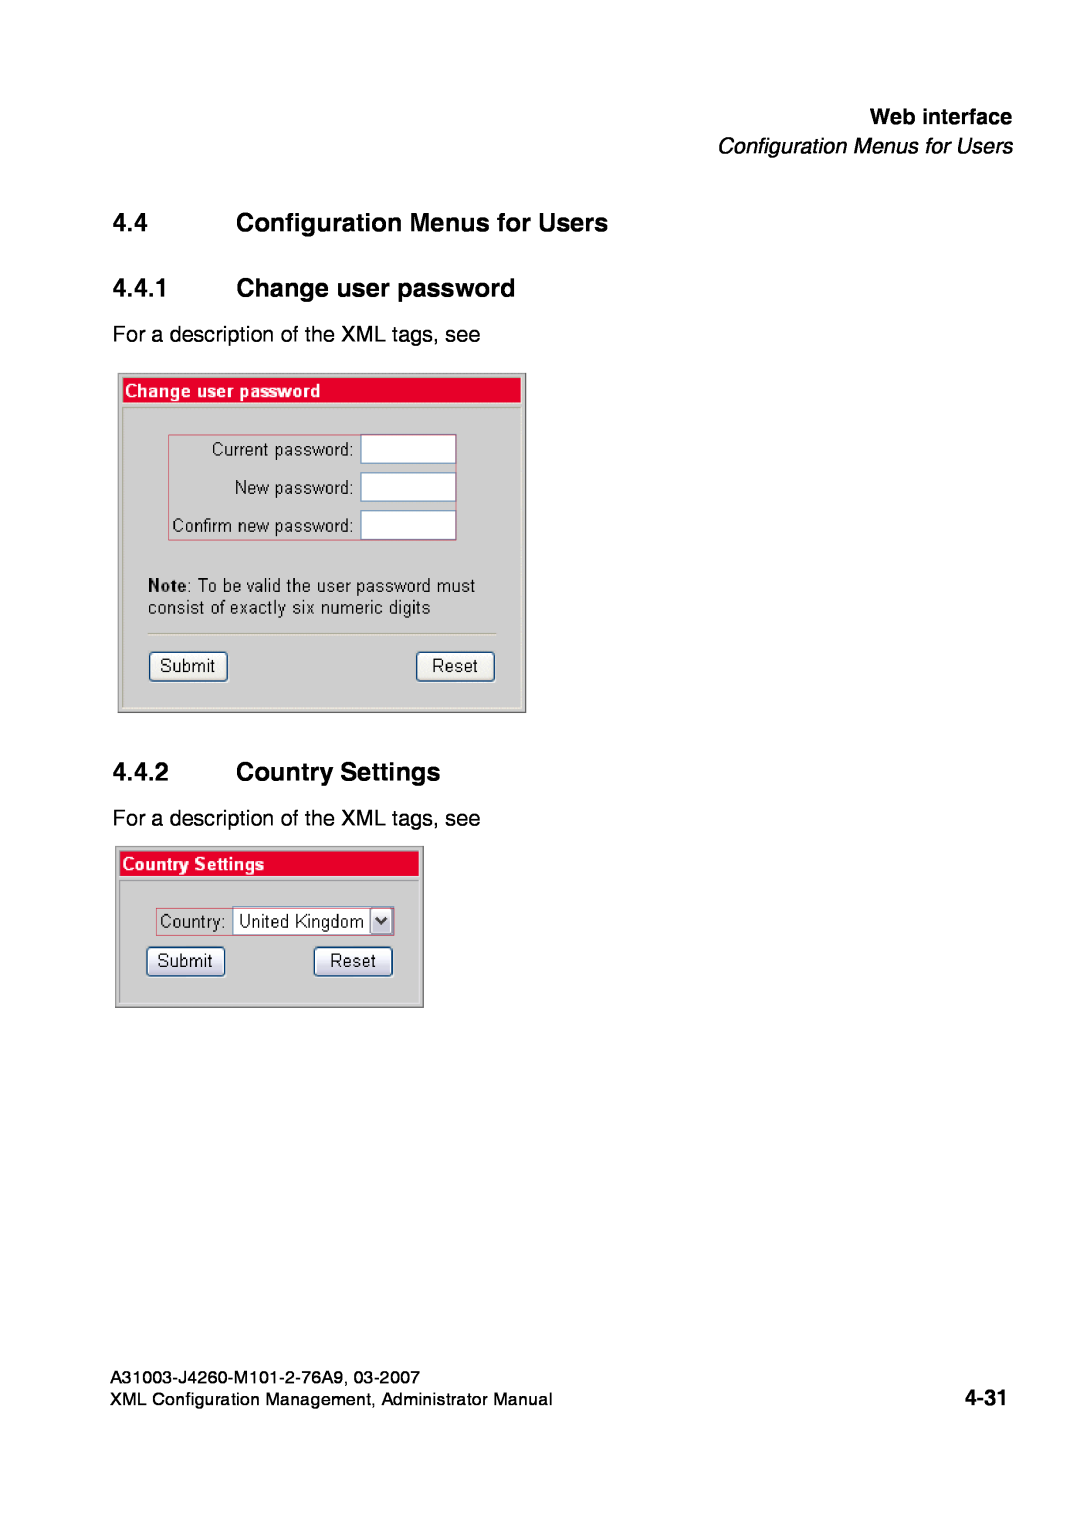 Siemens 410 S V6.0 manual Configuration Menus for Users 4.4.1 Change user password, Country Settings, 4-31, Web interface 